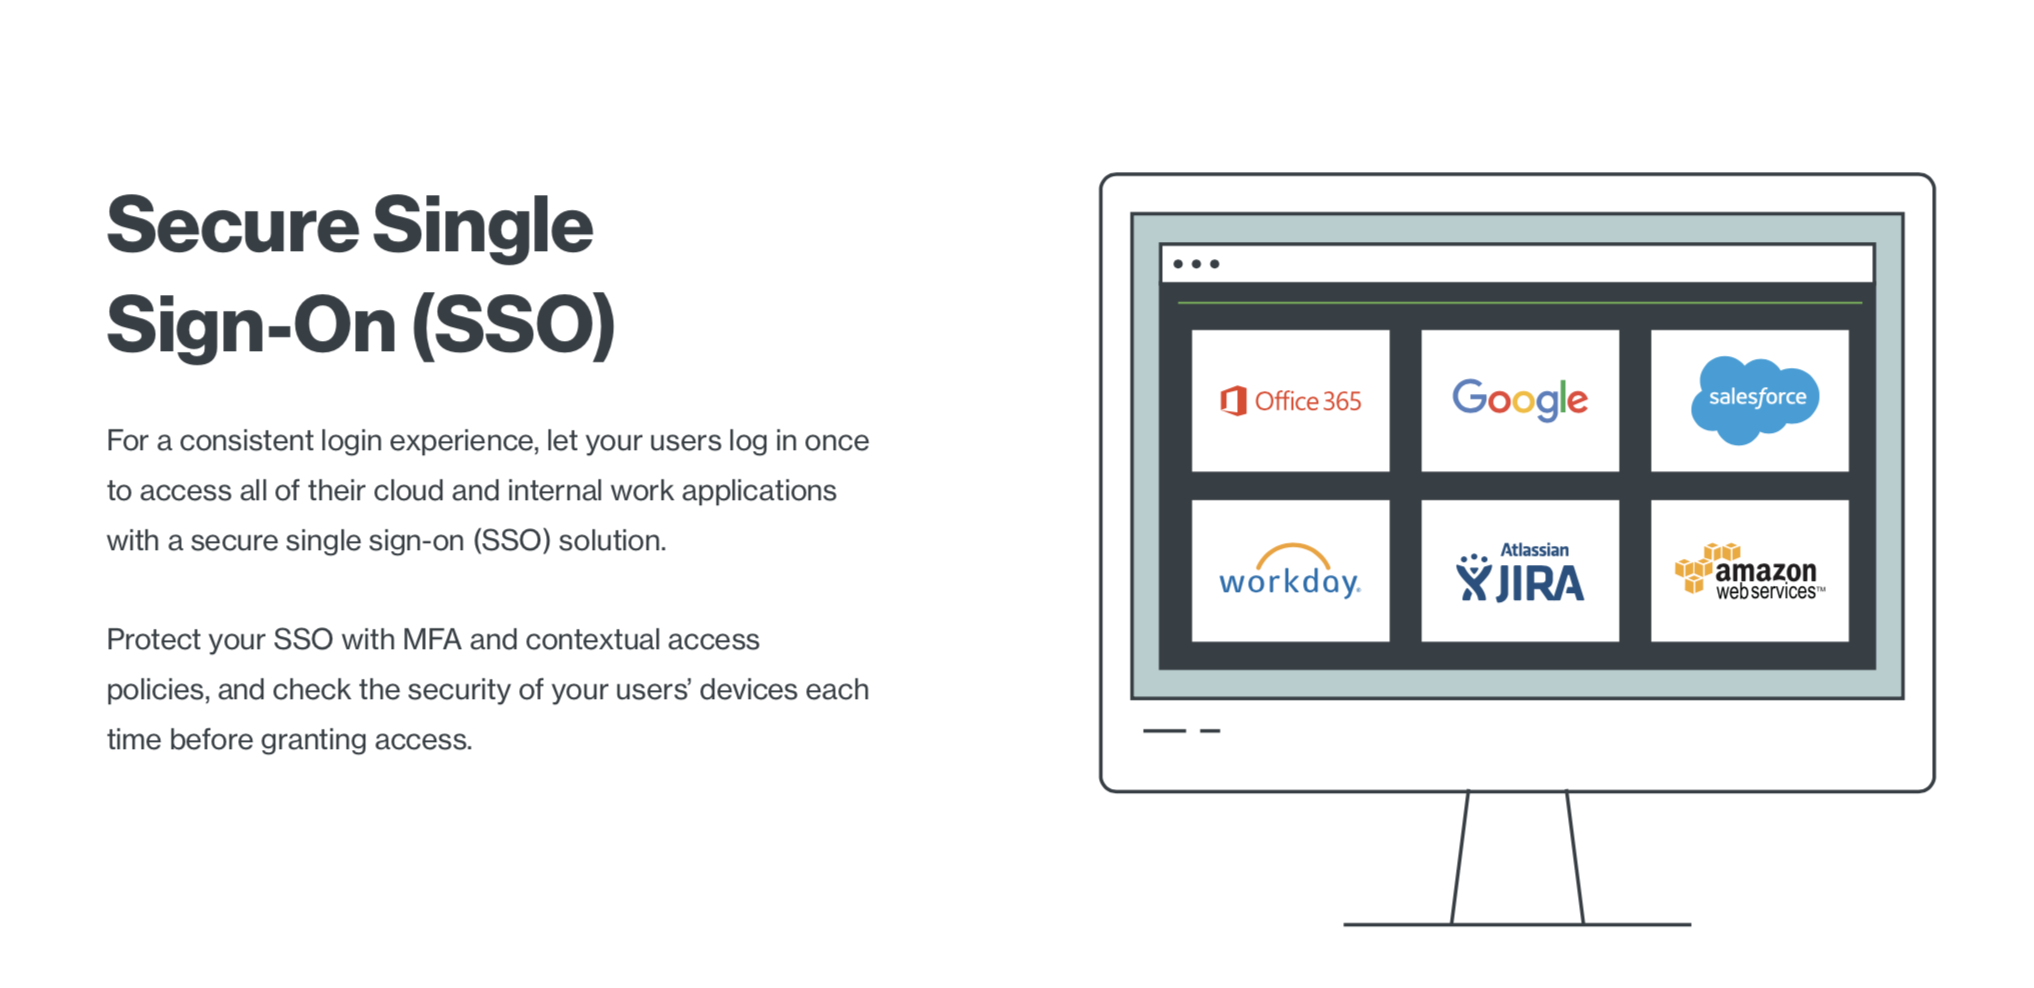 Secure Single Sign-On (SSO): For a consistent login experience, use SSO and protect with multi-factor authentication (MFA).